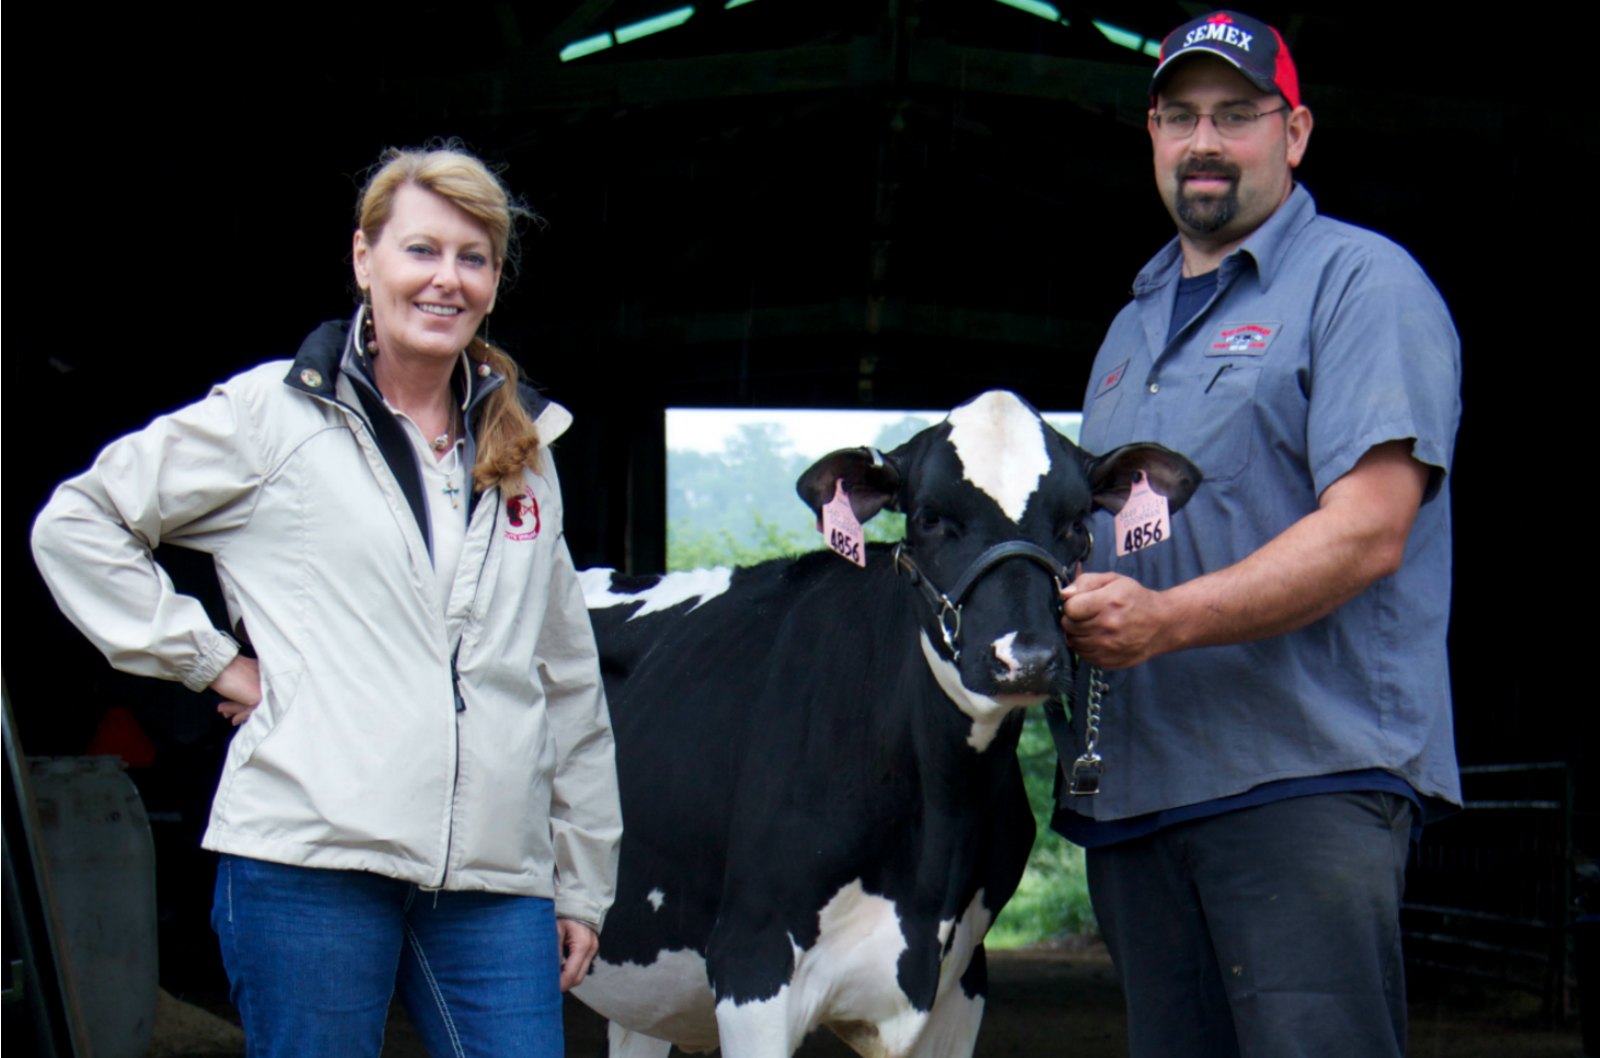 Breeding Selection Technology Allows Dairy Farmers to Raise Healthier Herds